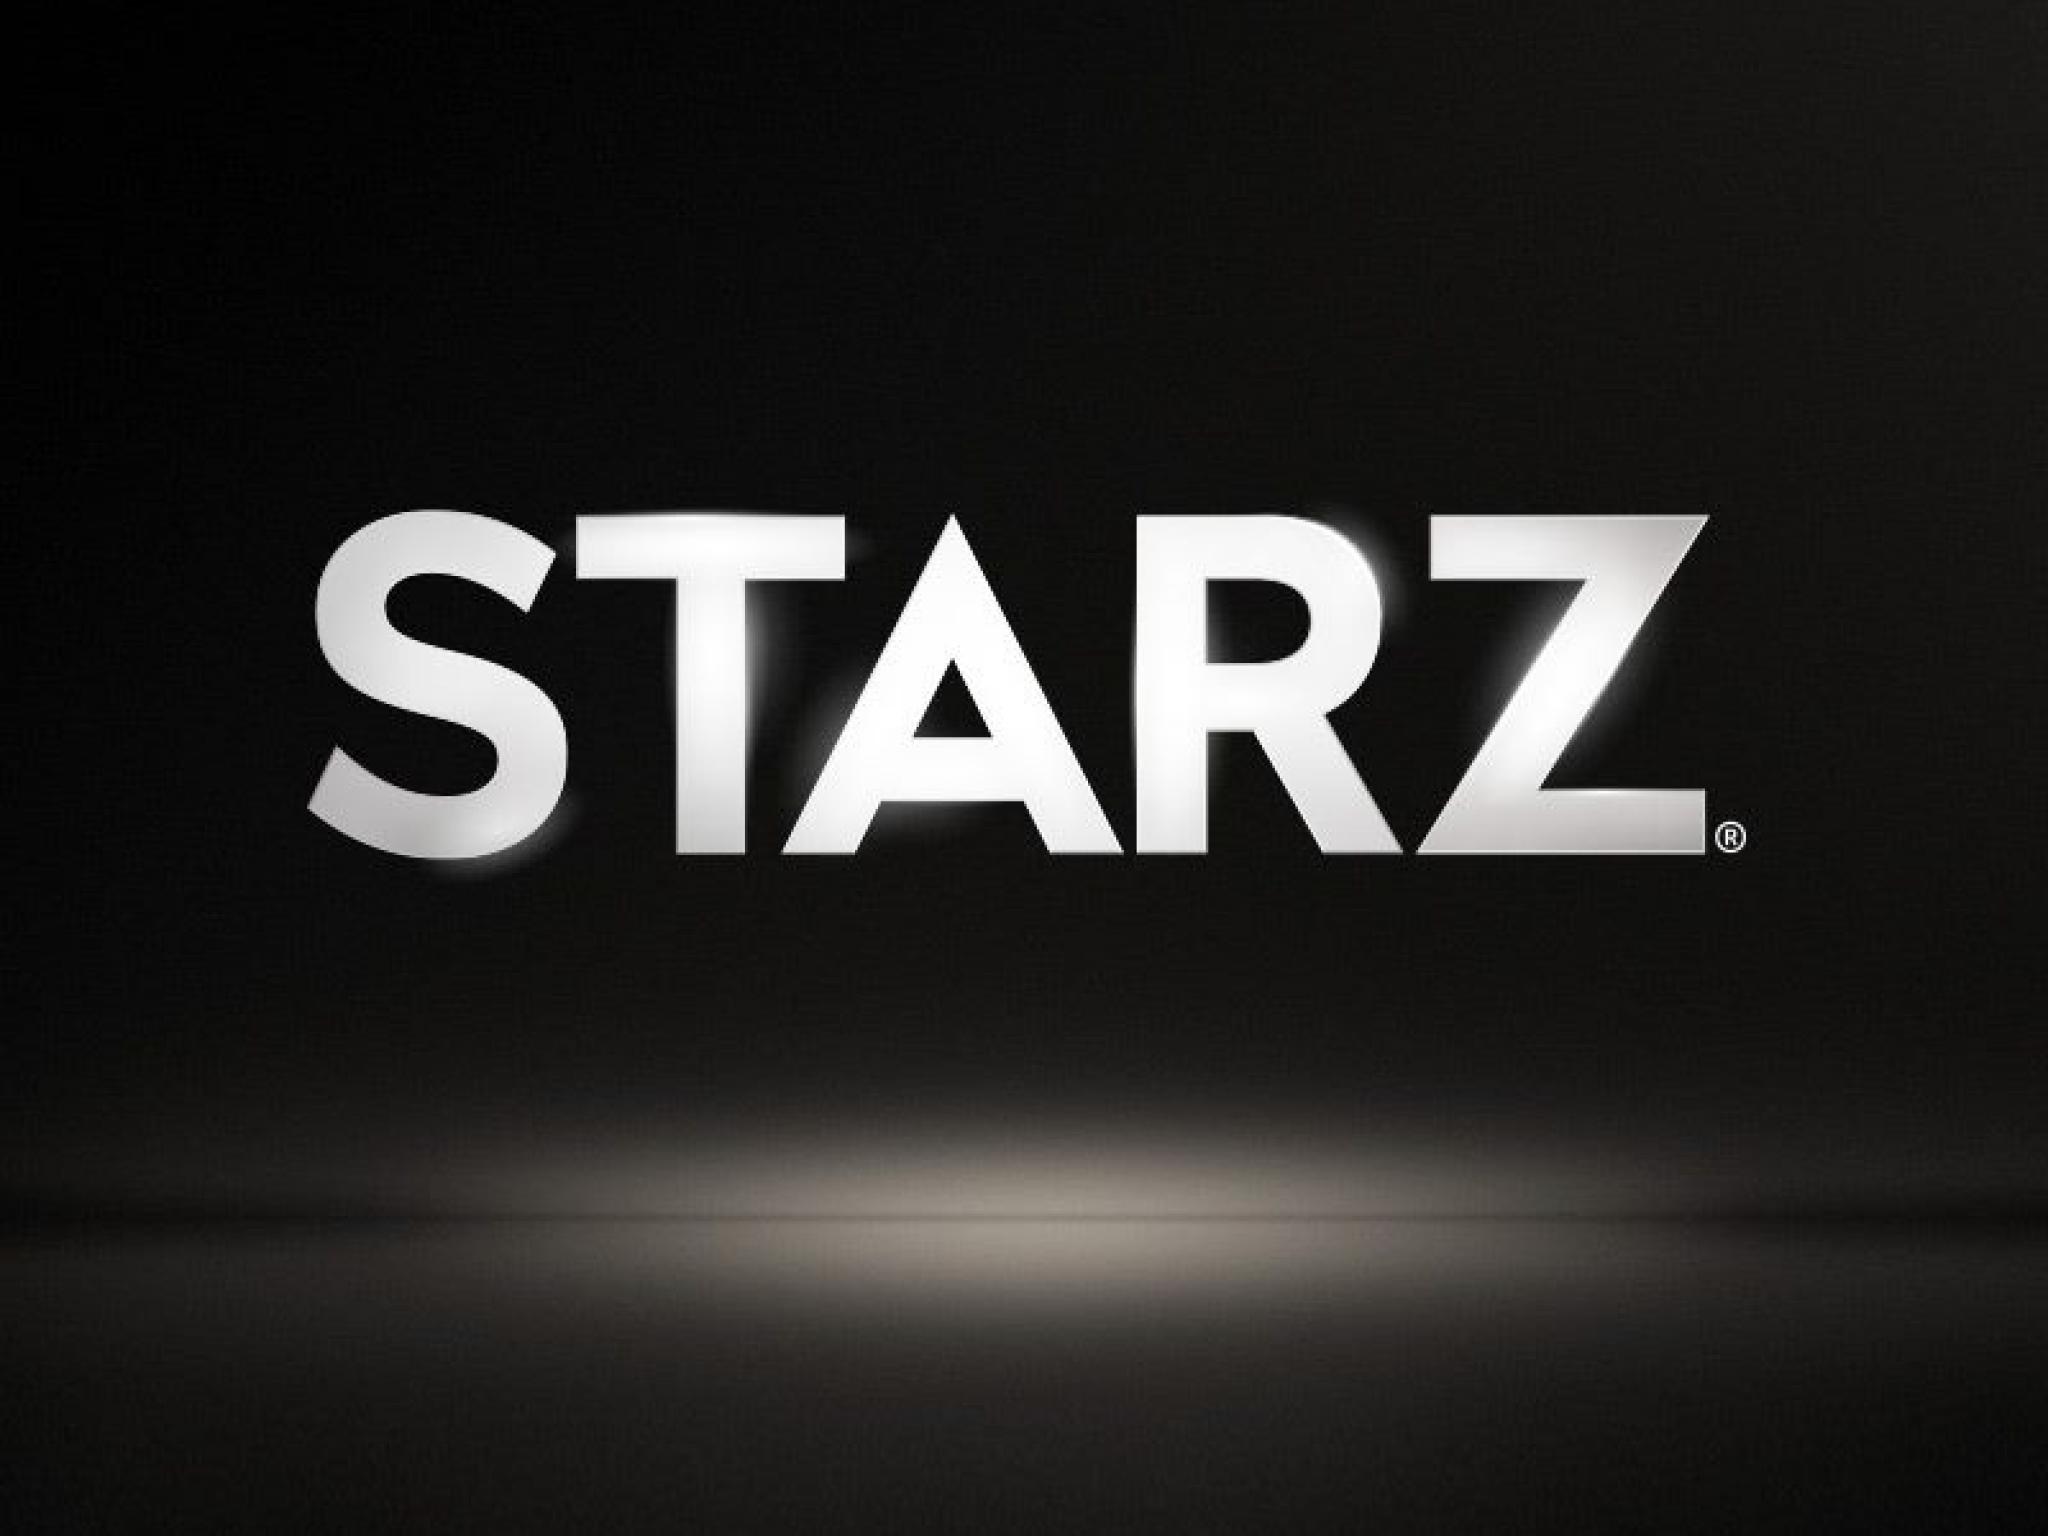  lions-gate-entertainment-mulling-possible-starz-spinoff-report 